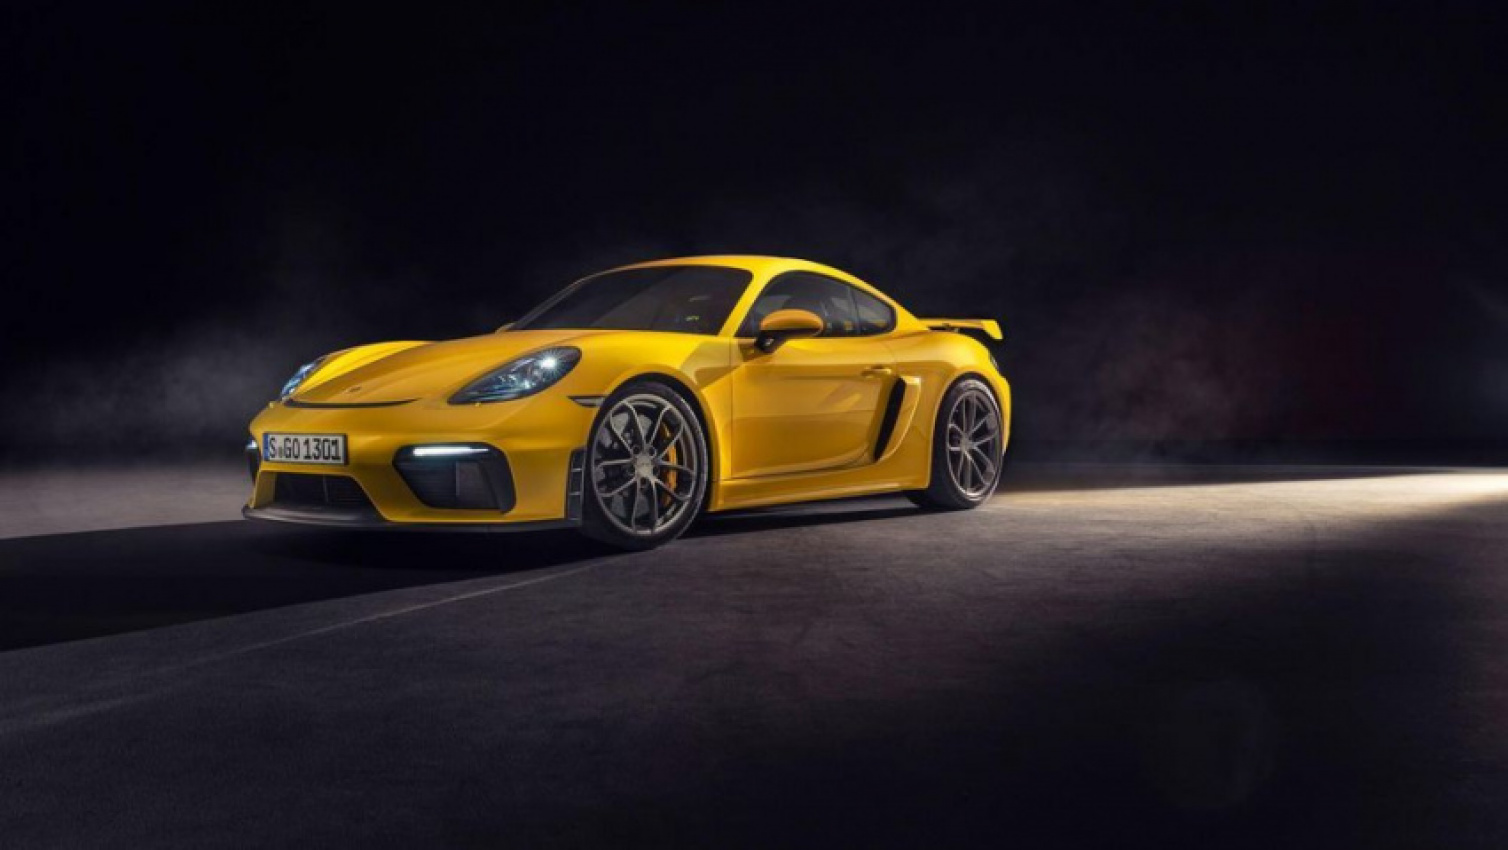 autos, cars, porsche, 718 spyder, auto news, cayman, cayman gt4, porsche 718 cayman gt4, porsche 718 spyder, porsche unveils new 718 spyder and 718 cayman gt4 - 6 speed manual, 0 to 100 in 4.4 seconds